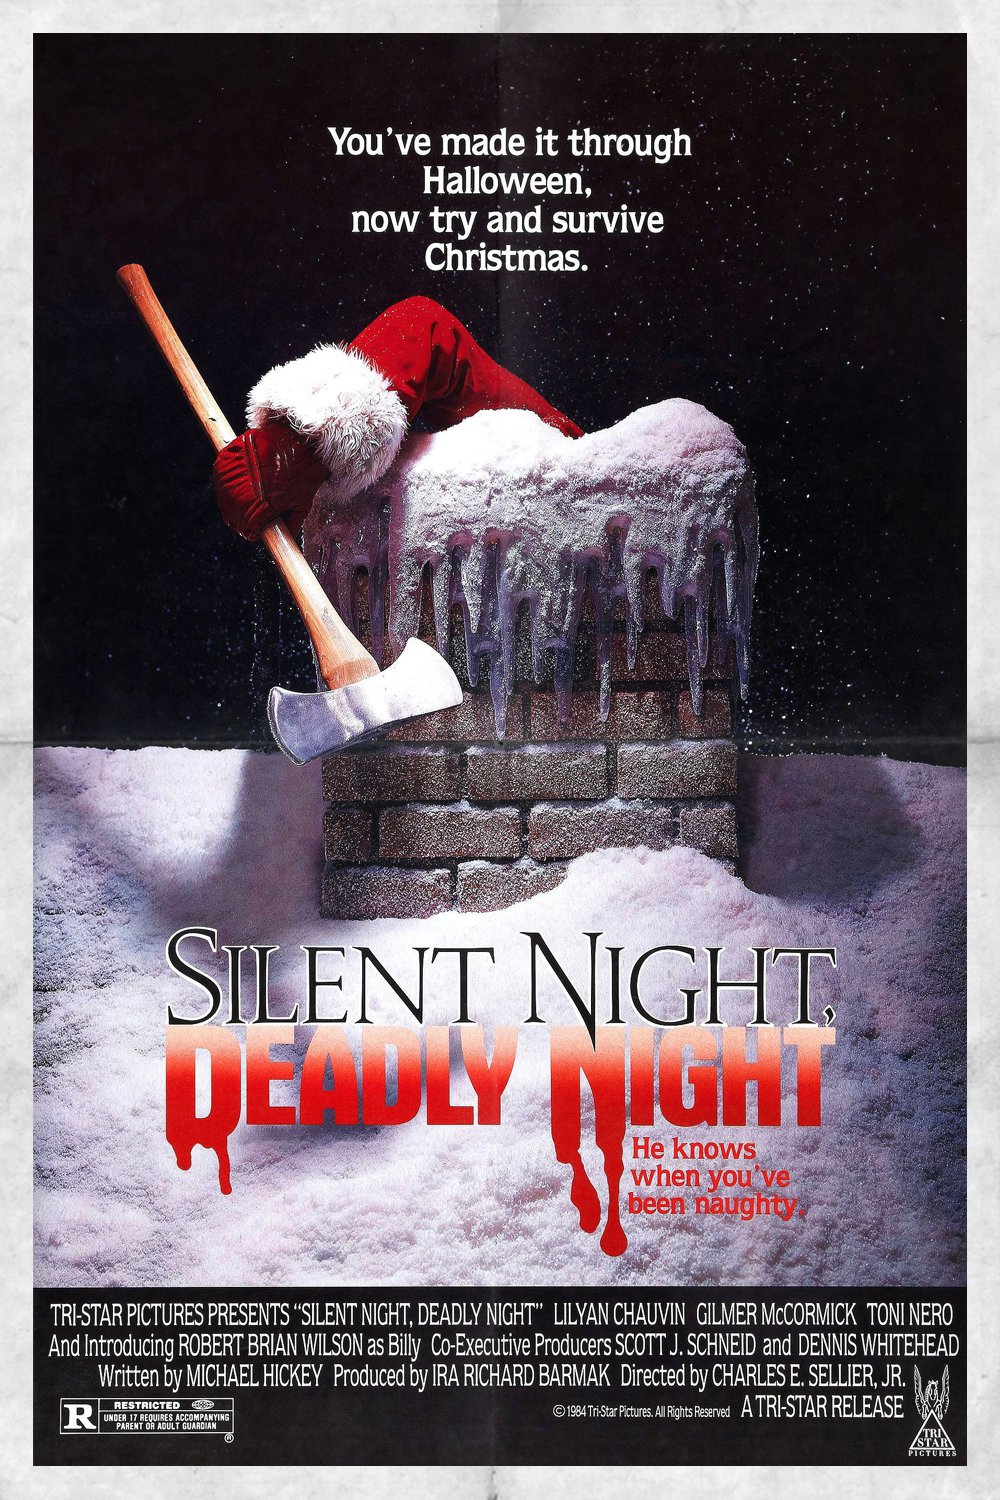 Poster for the movie "Silent Night, Deadly Night"